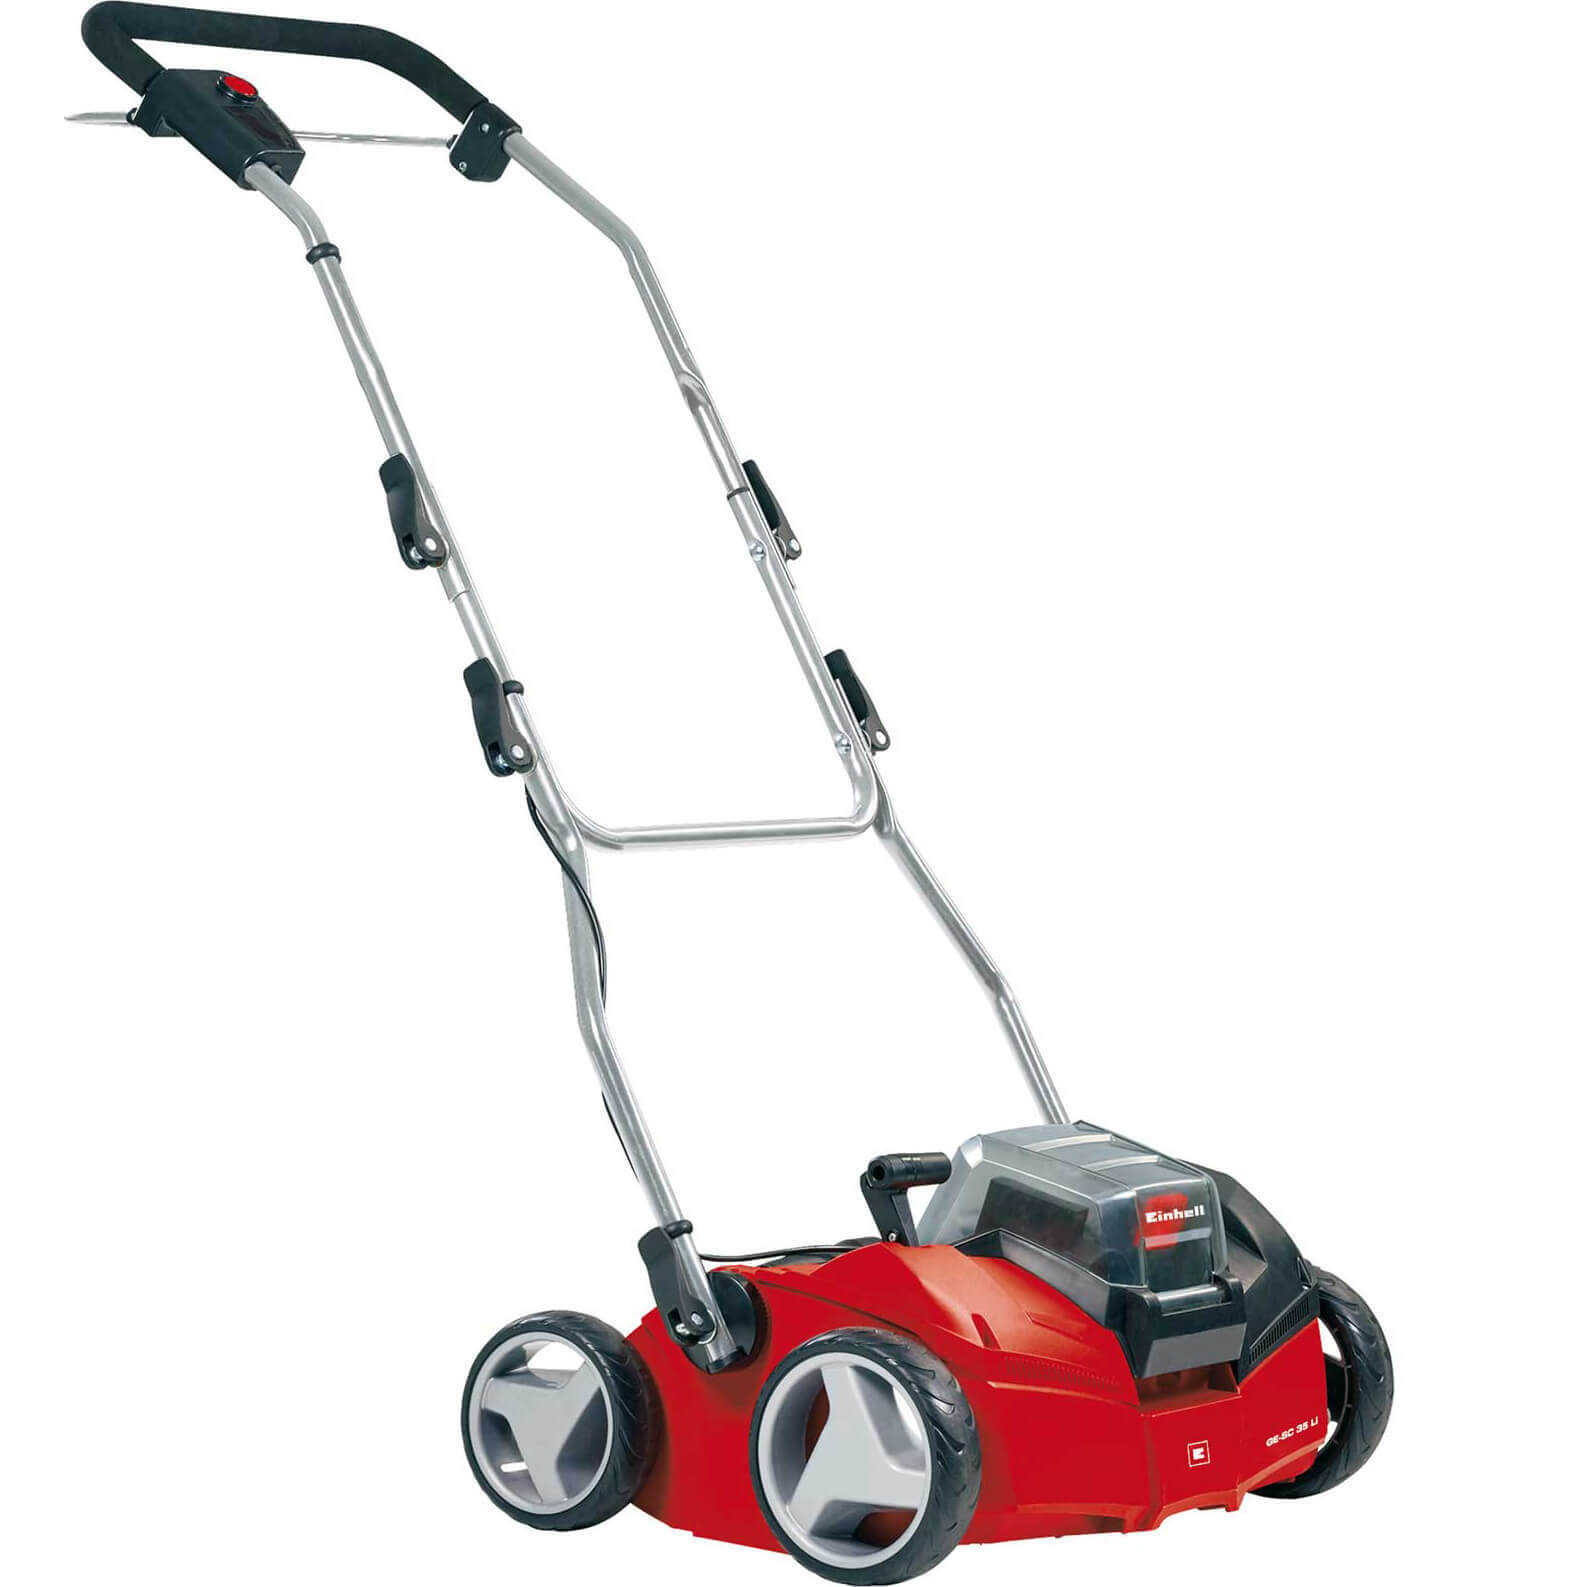 Einhell GE-SC 35/1 Li 36v Cordless Brushless 2 in 1 Lawnraker and Scarifier 350mm (Uses 2 x 18v) No Batteries No Charger